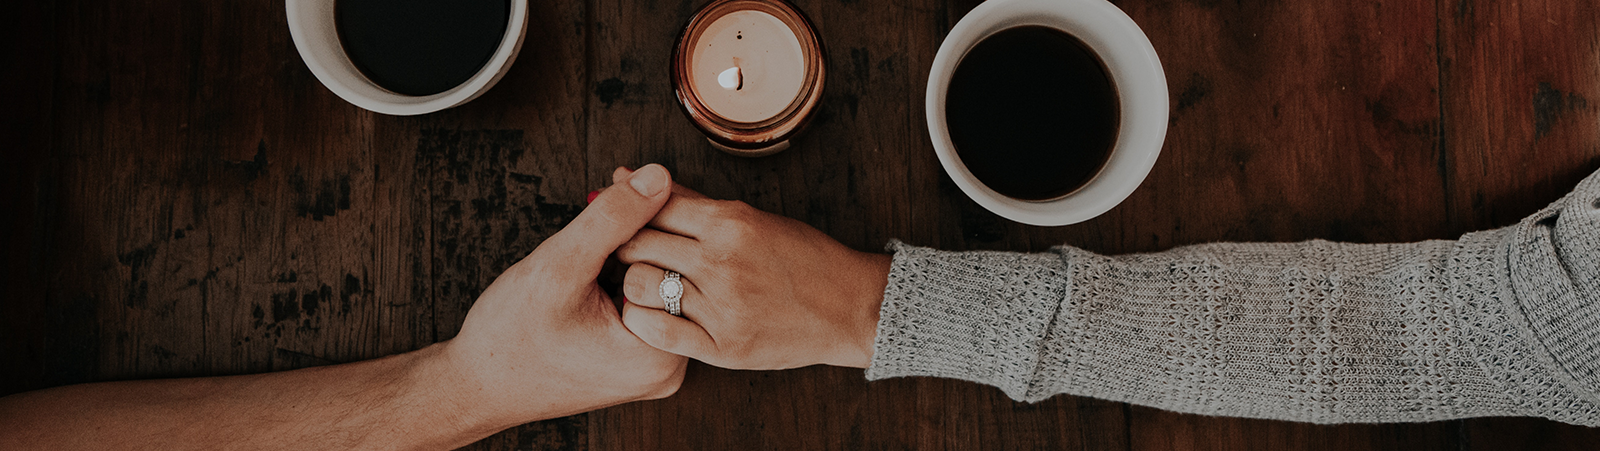 Marriage Counseling in Greensboro, NC—Relationship Help from a Marriage Counselor